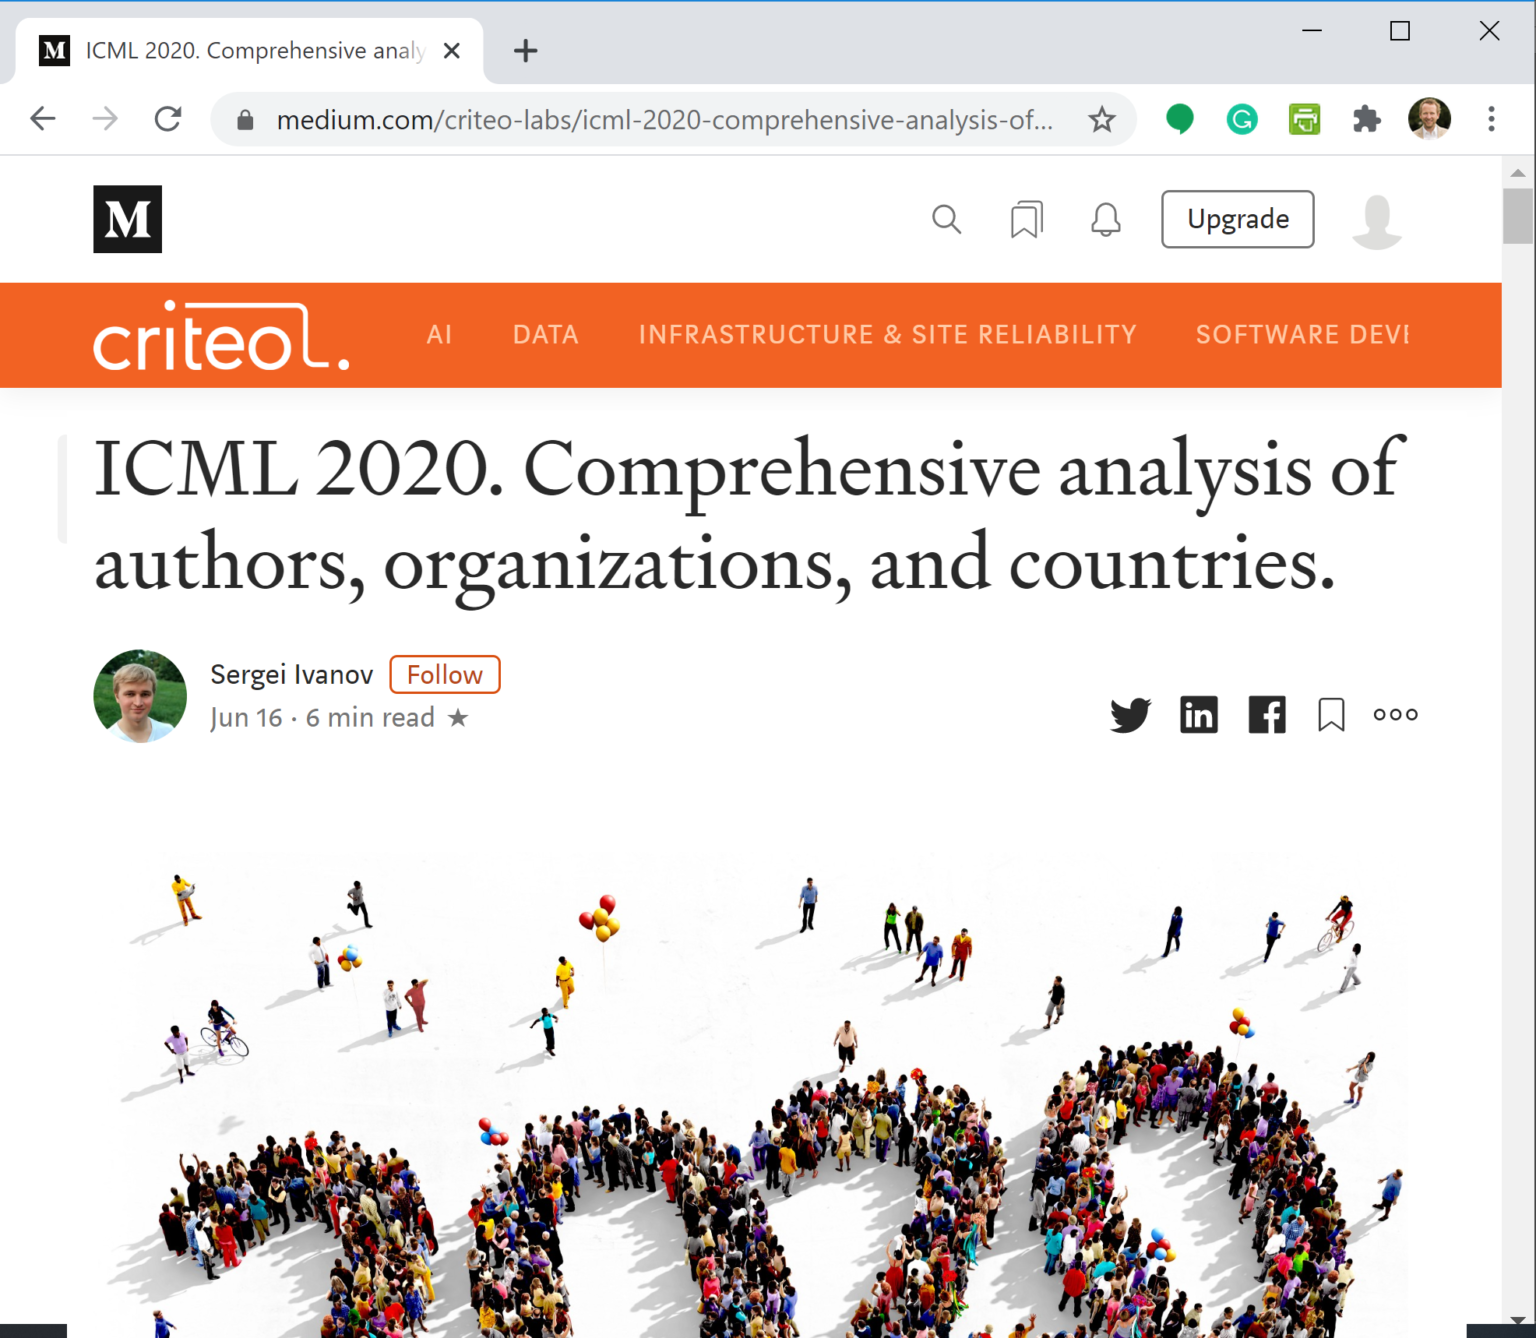 ICML 2020. Comprehensive analysis of authors, organizations, and